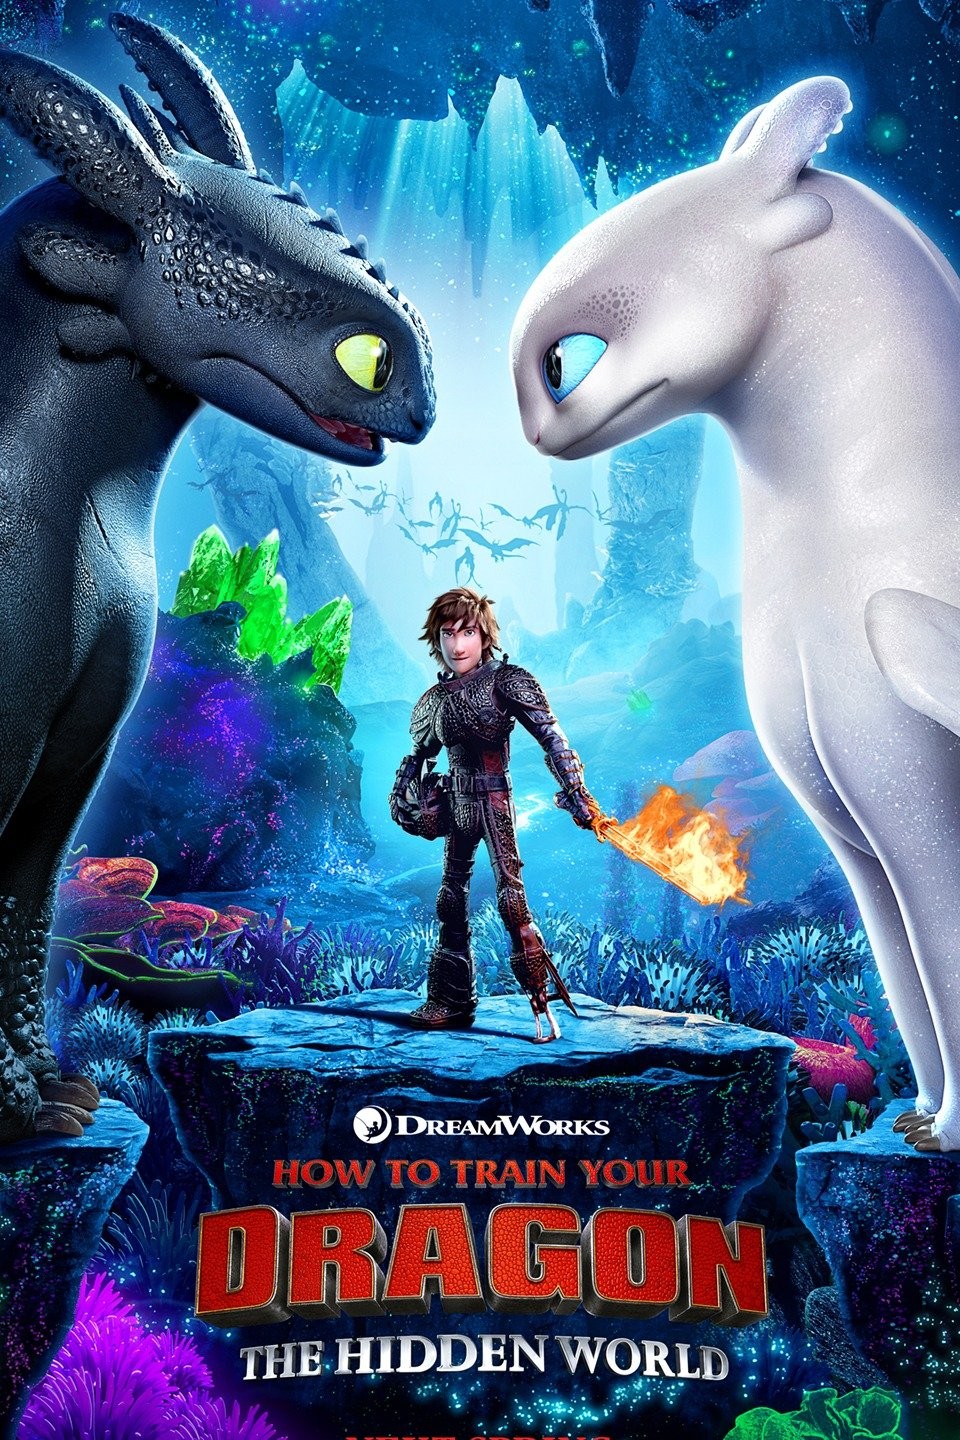 christina berryhill recommends httyd watching the movie pic